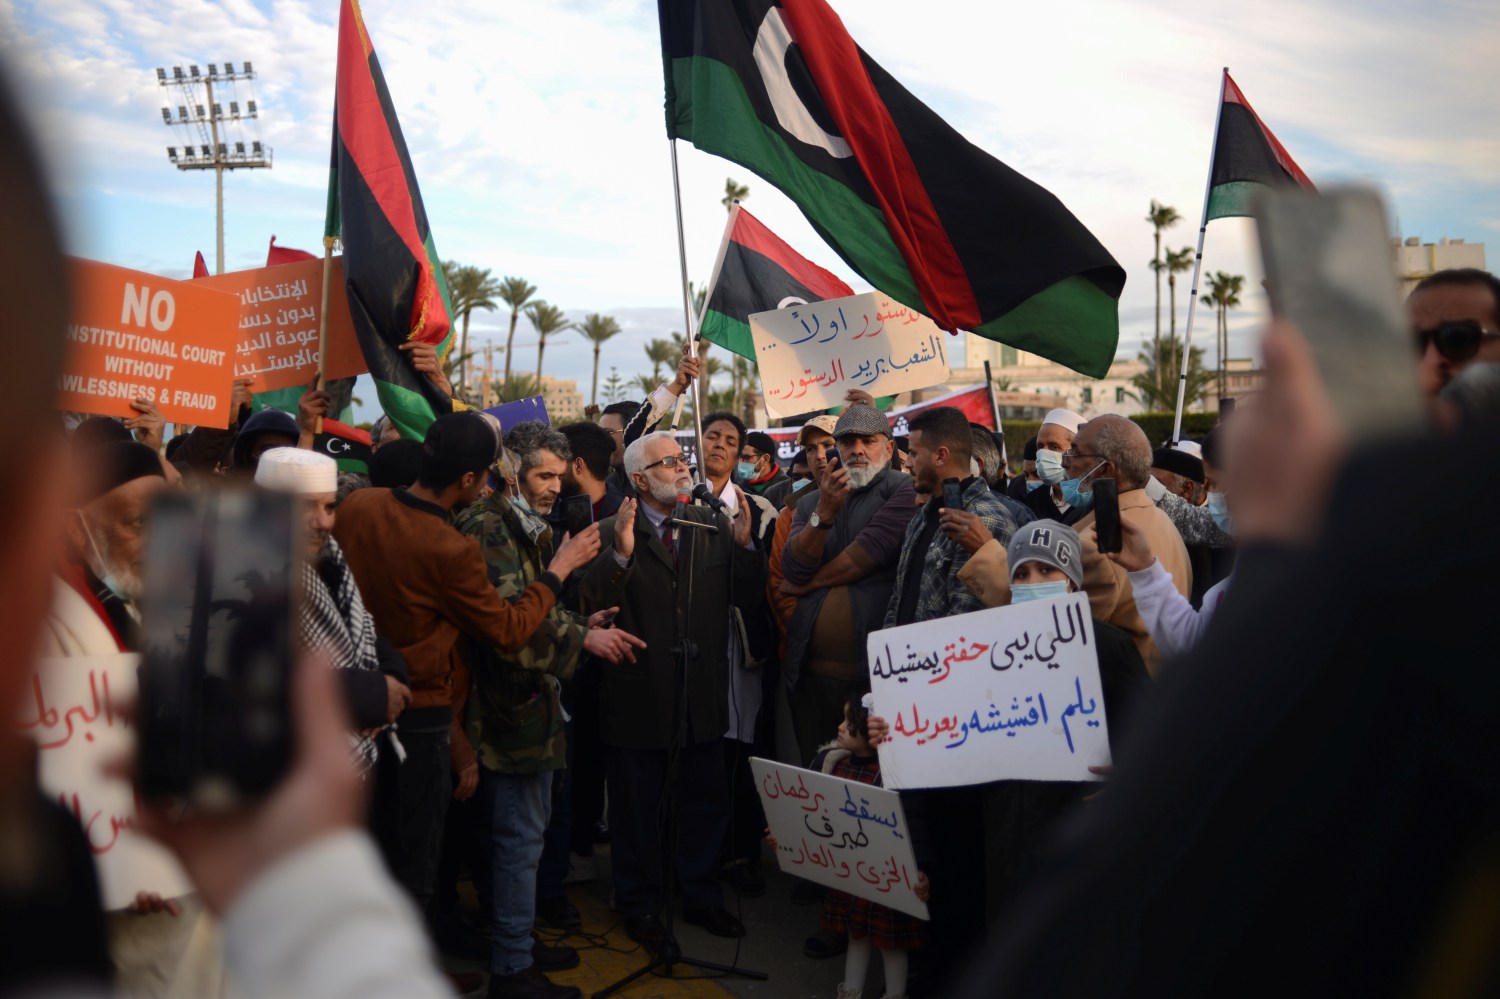 Libyans holding signs and their national flags participate in a protest against the parliament?s latest decision to name a new interim prime minister, at Martyr's square in Tripoli, Libya February 11, 2022. REUTERS/Nada Harib